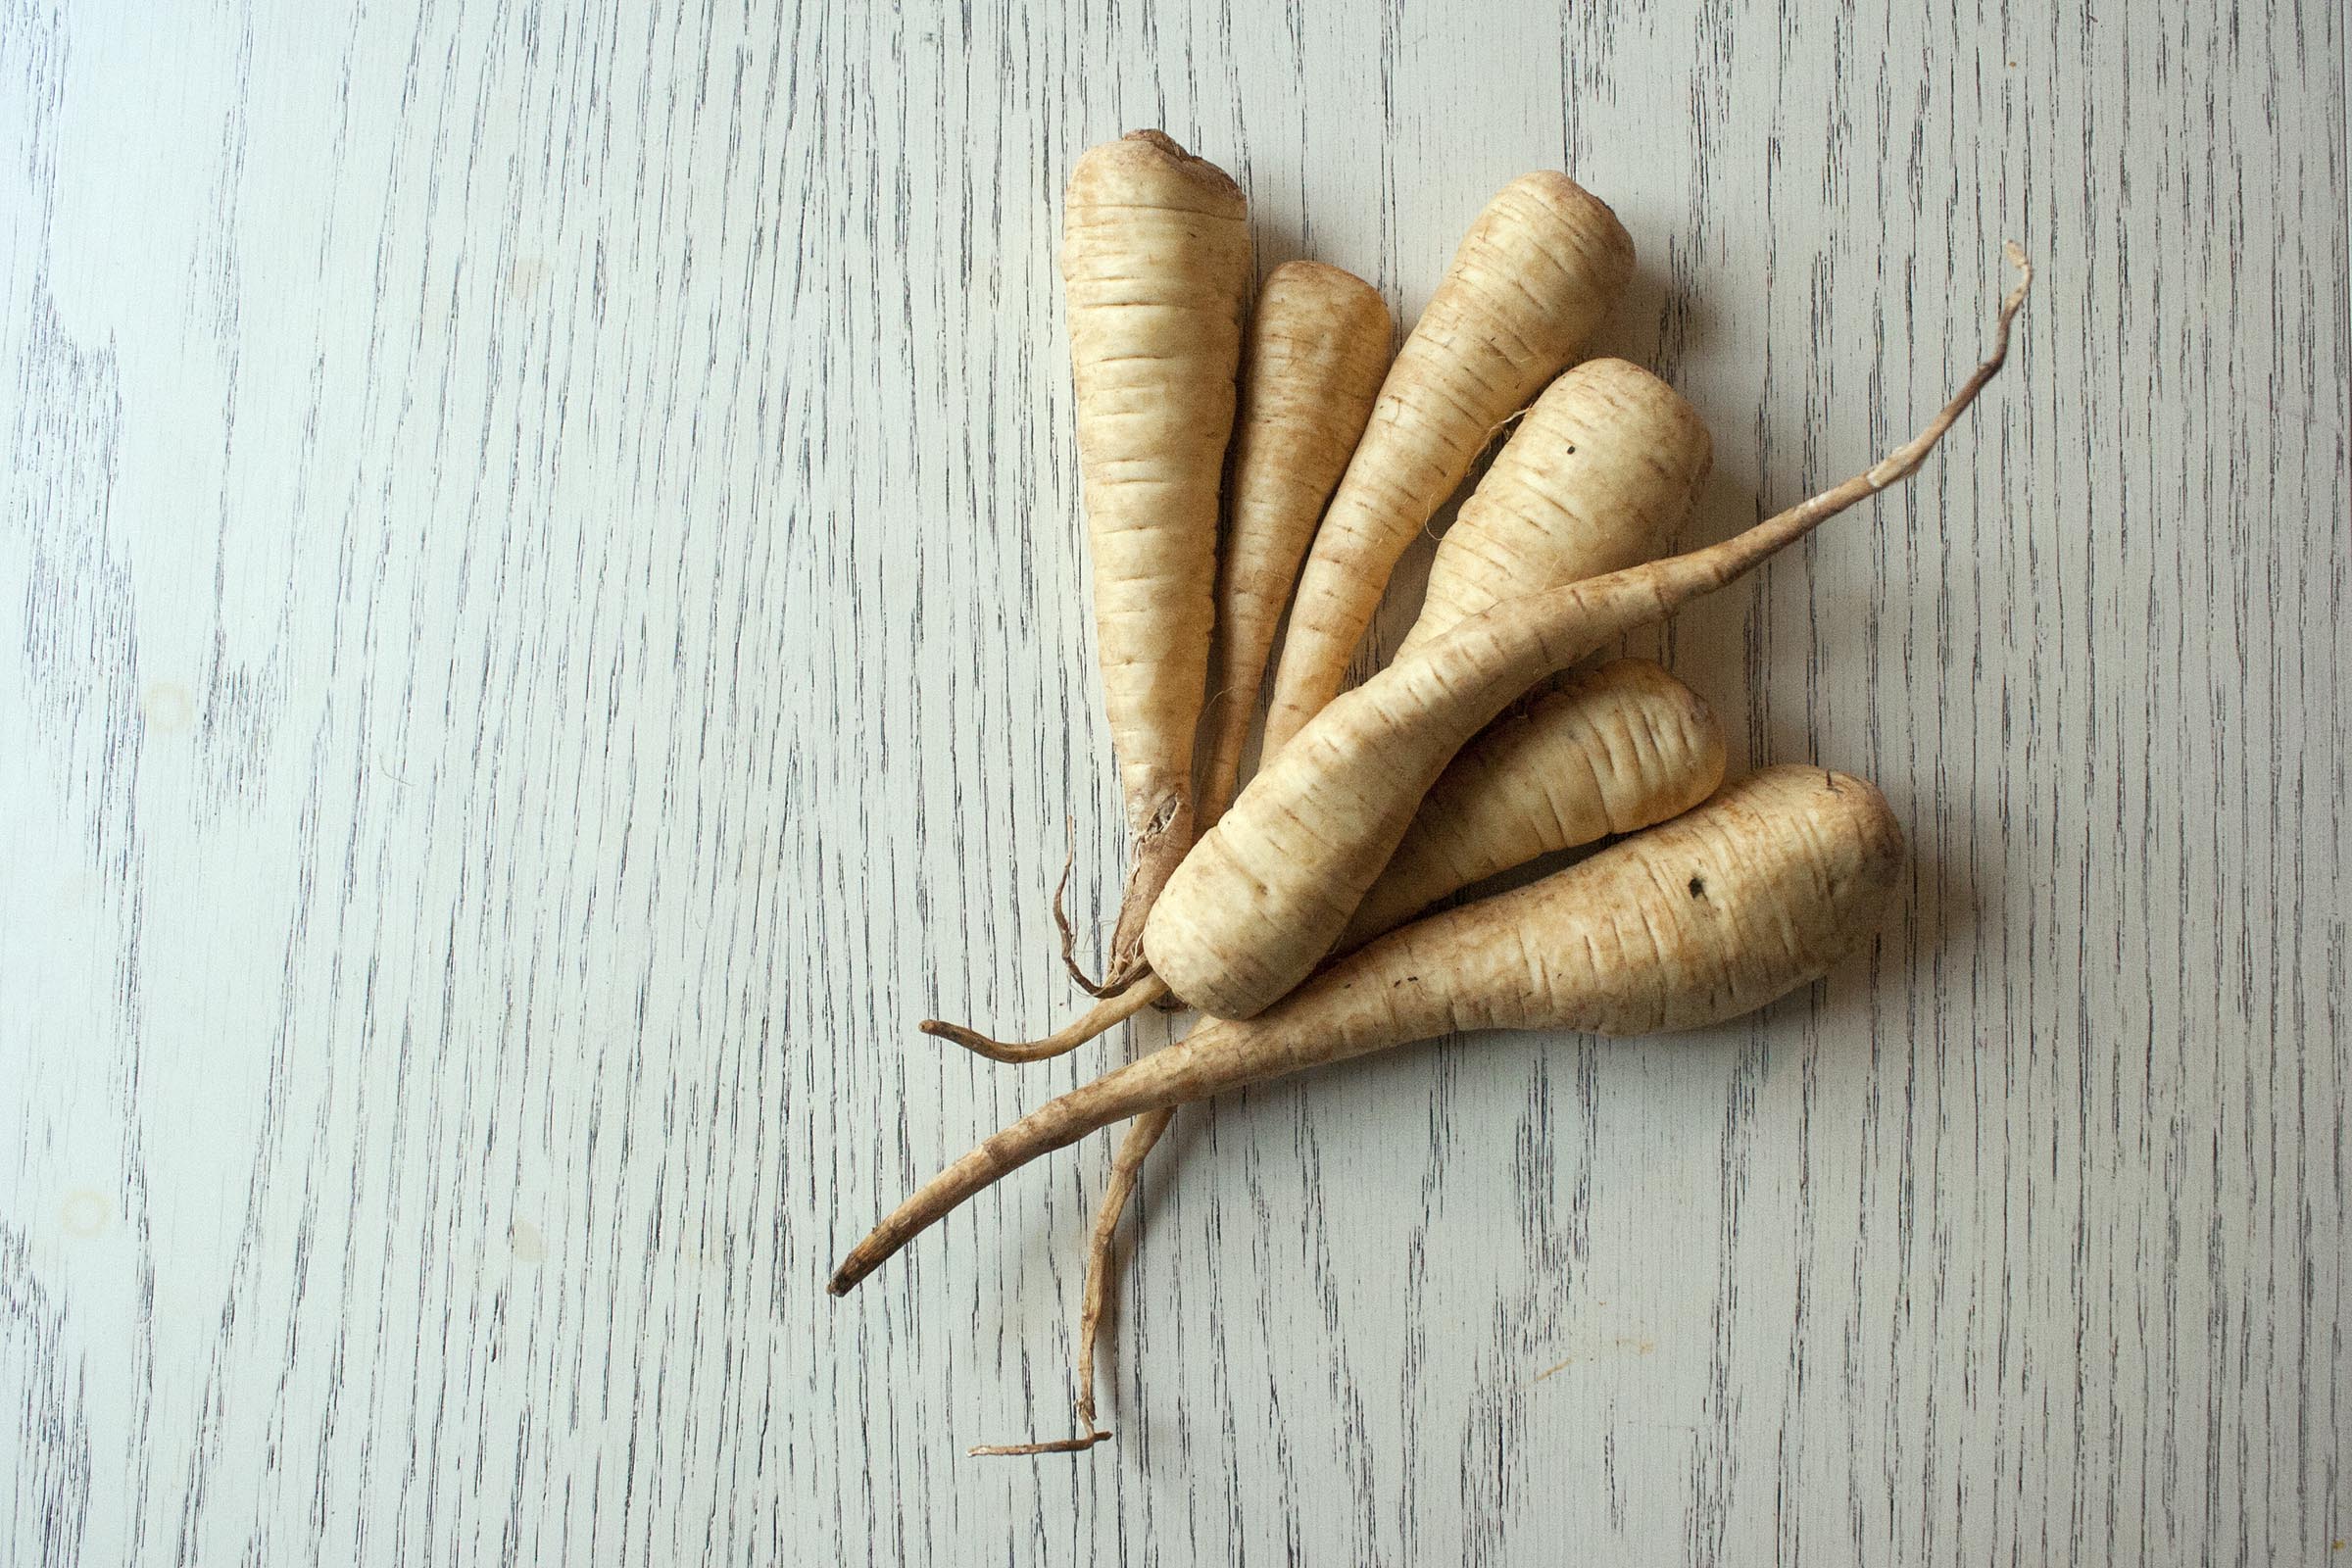 These are small parsnips, perfect for peeling, chopping and steaming to puree for baby.